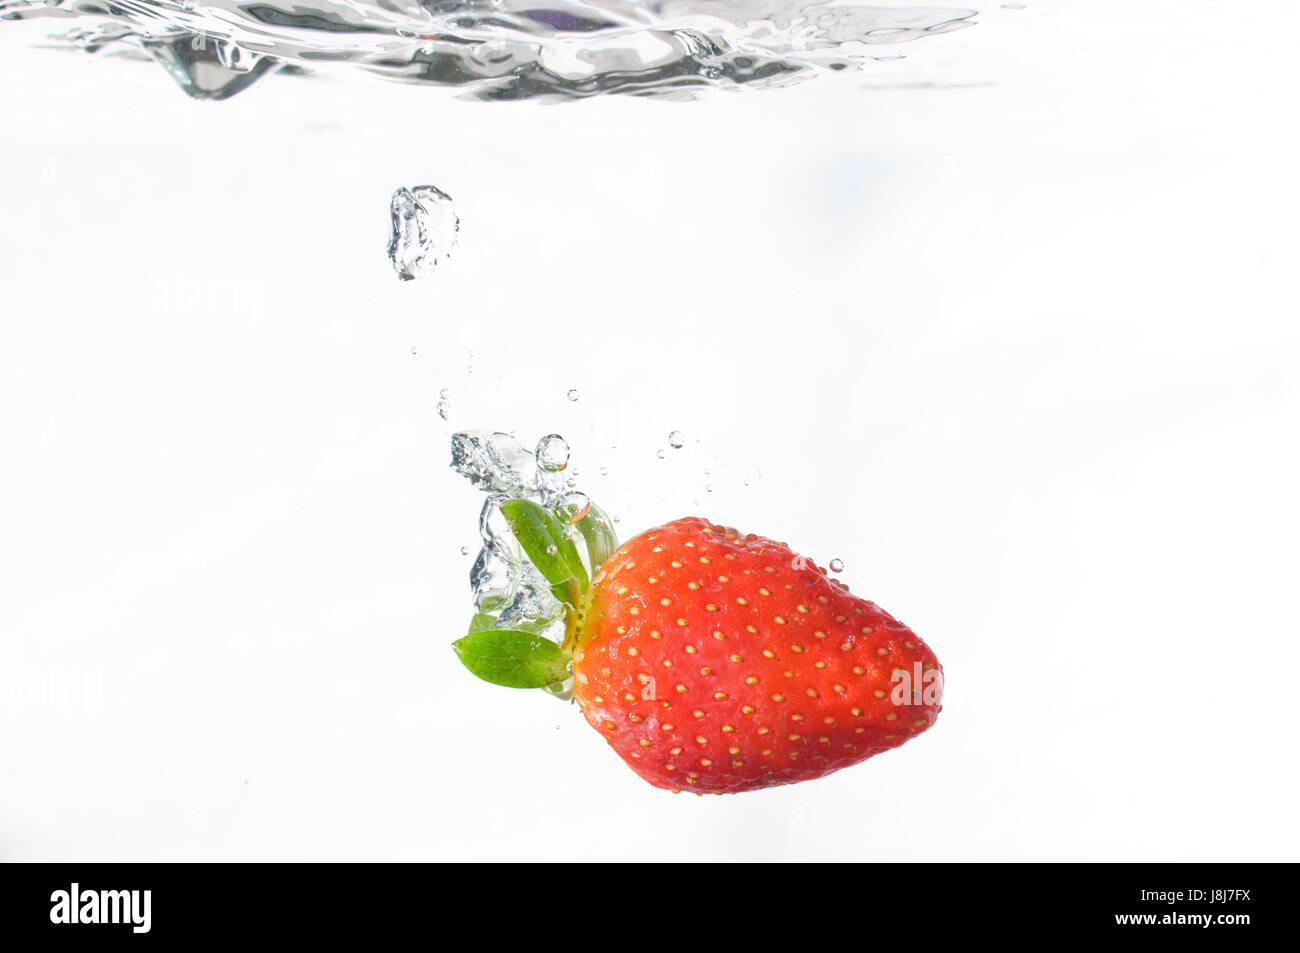 stawberry falling in the water Stock Photo